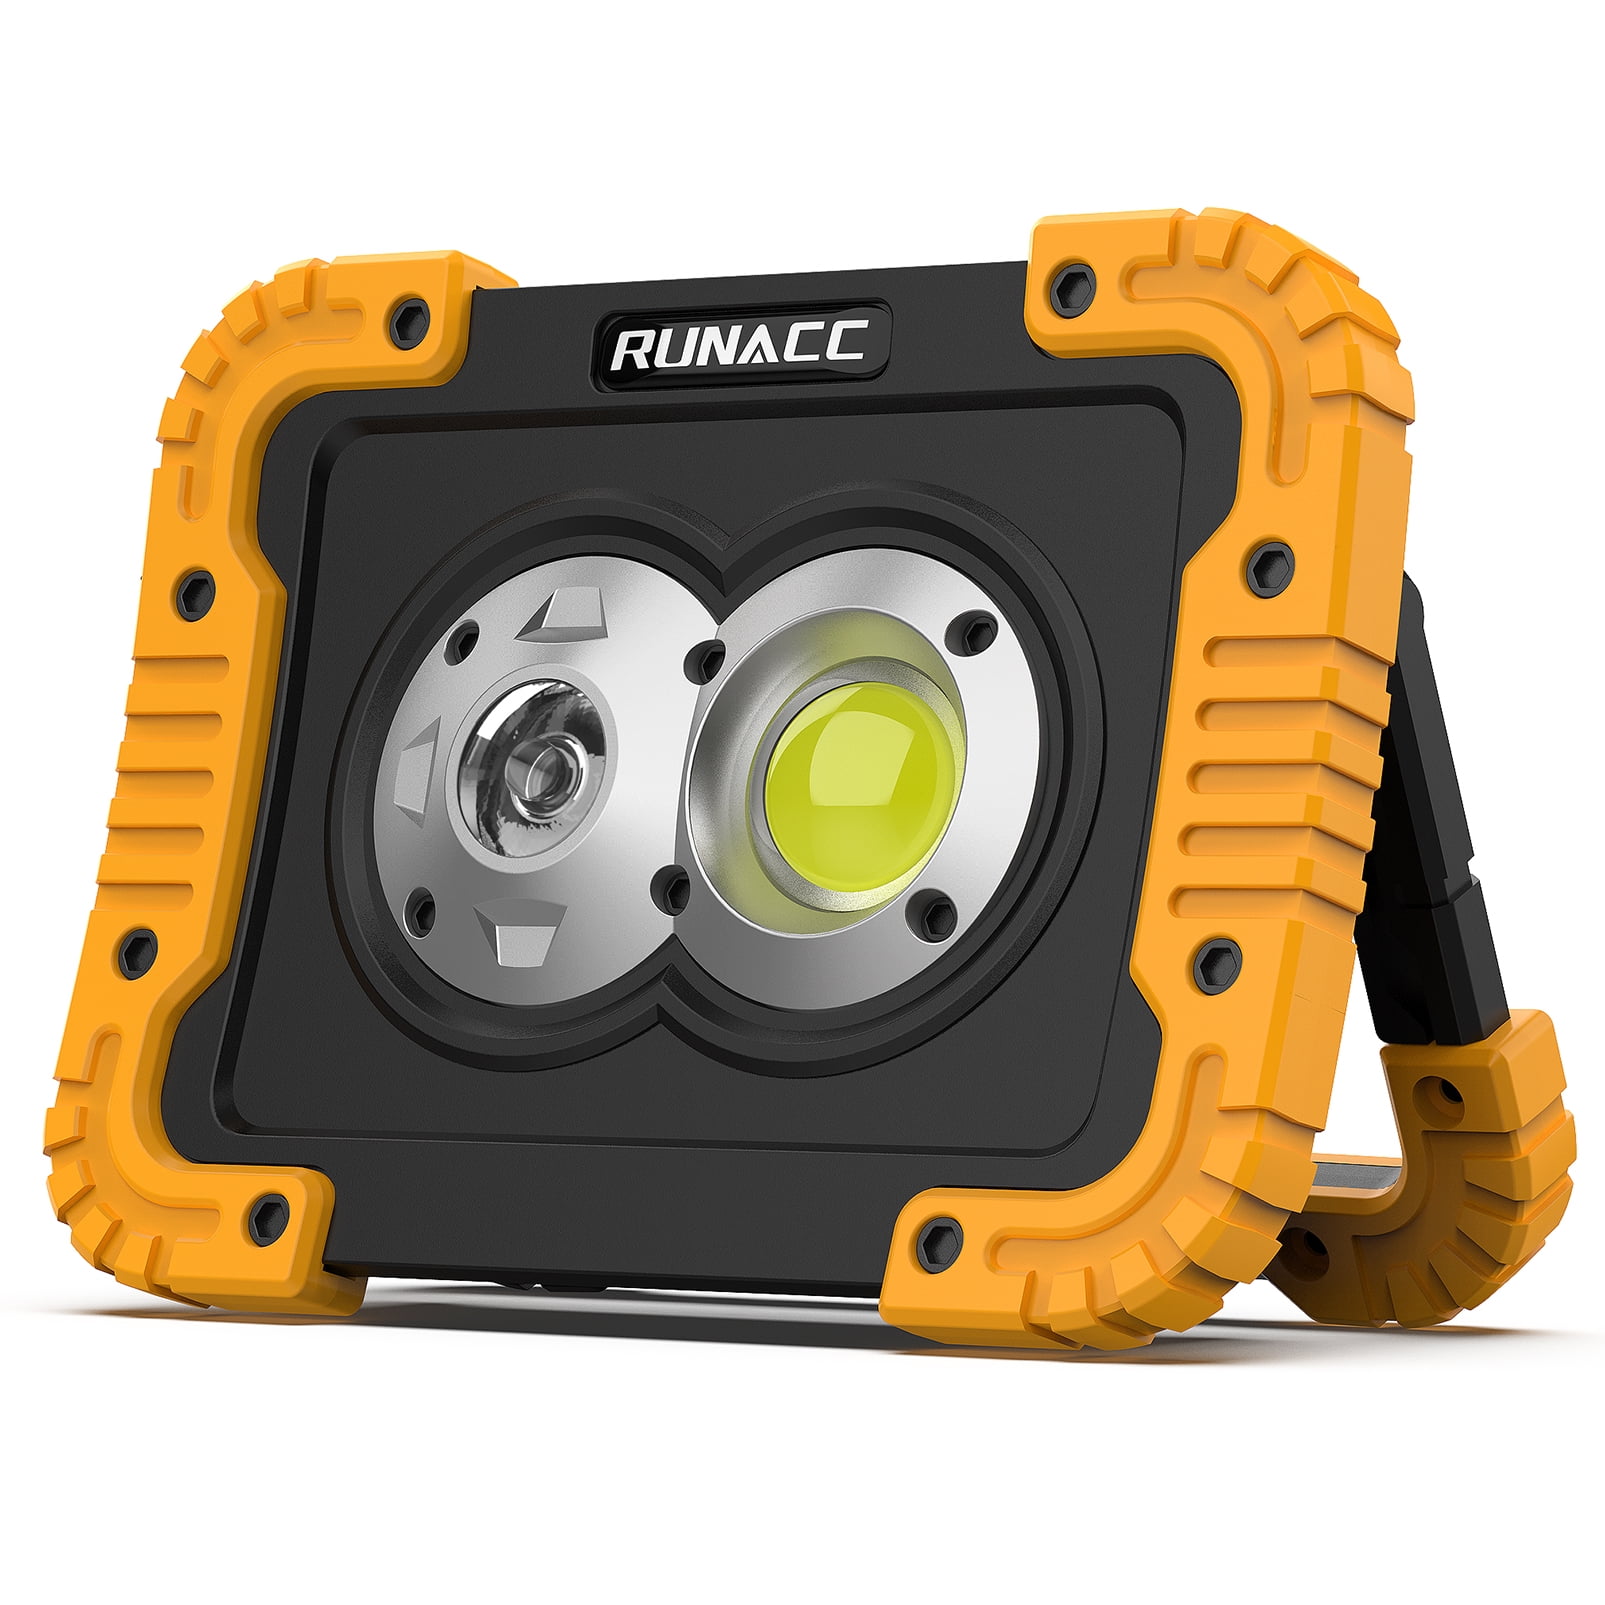 Battery Included 2PCS Rechargeable Work Light COB 20W 1000LM Waterproof LED Portable Flood Light for Outdoor Camping Hiking Emergency Car Repairing Fishing BBQ